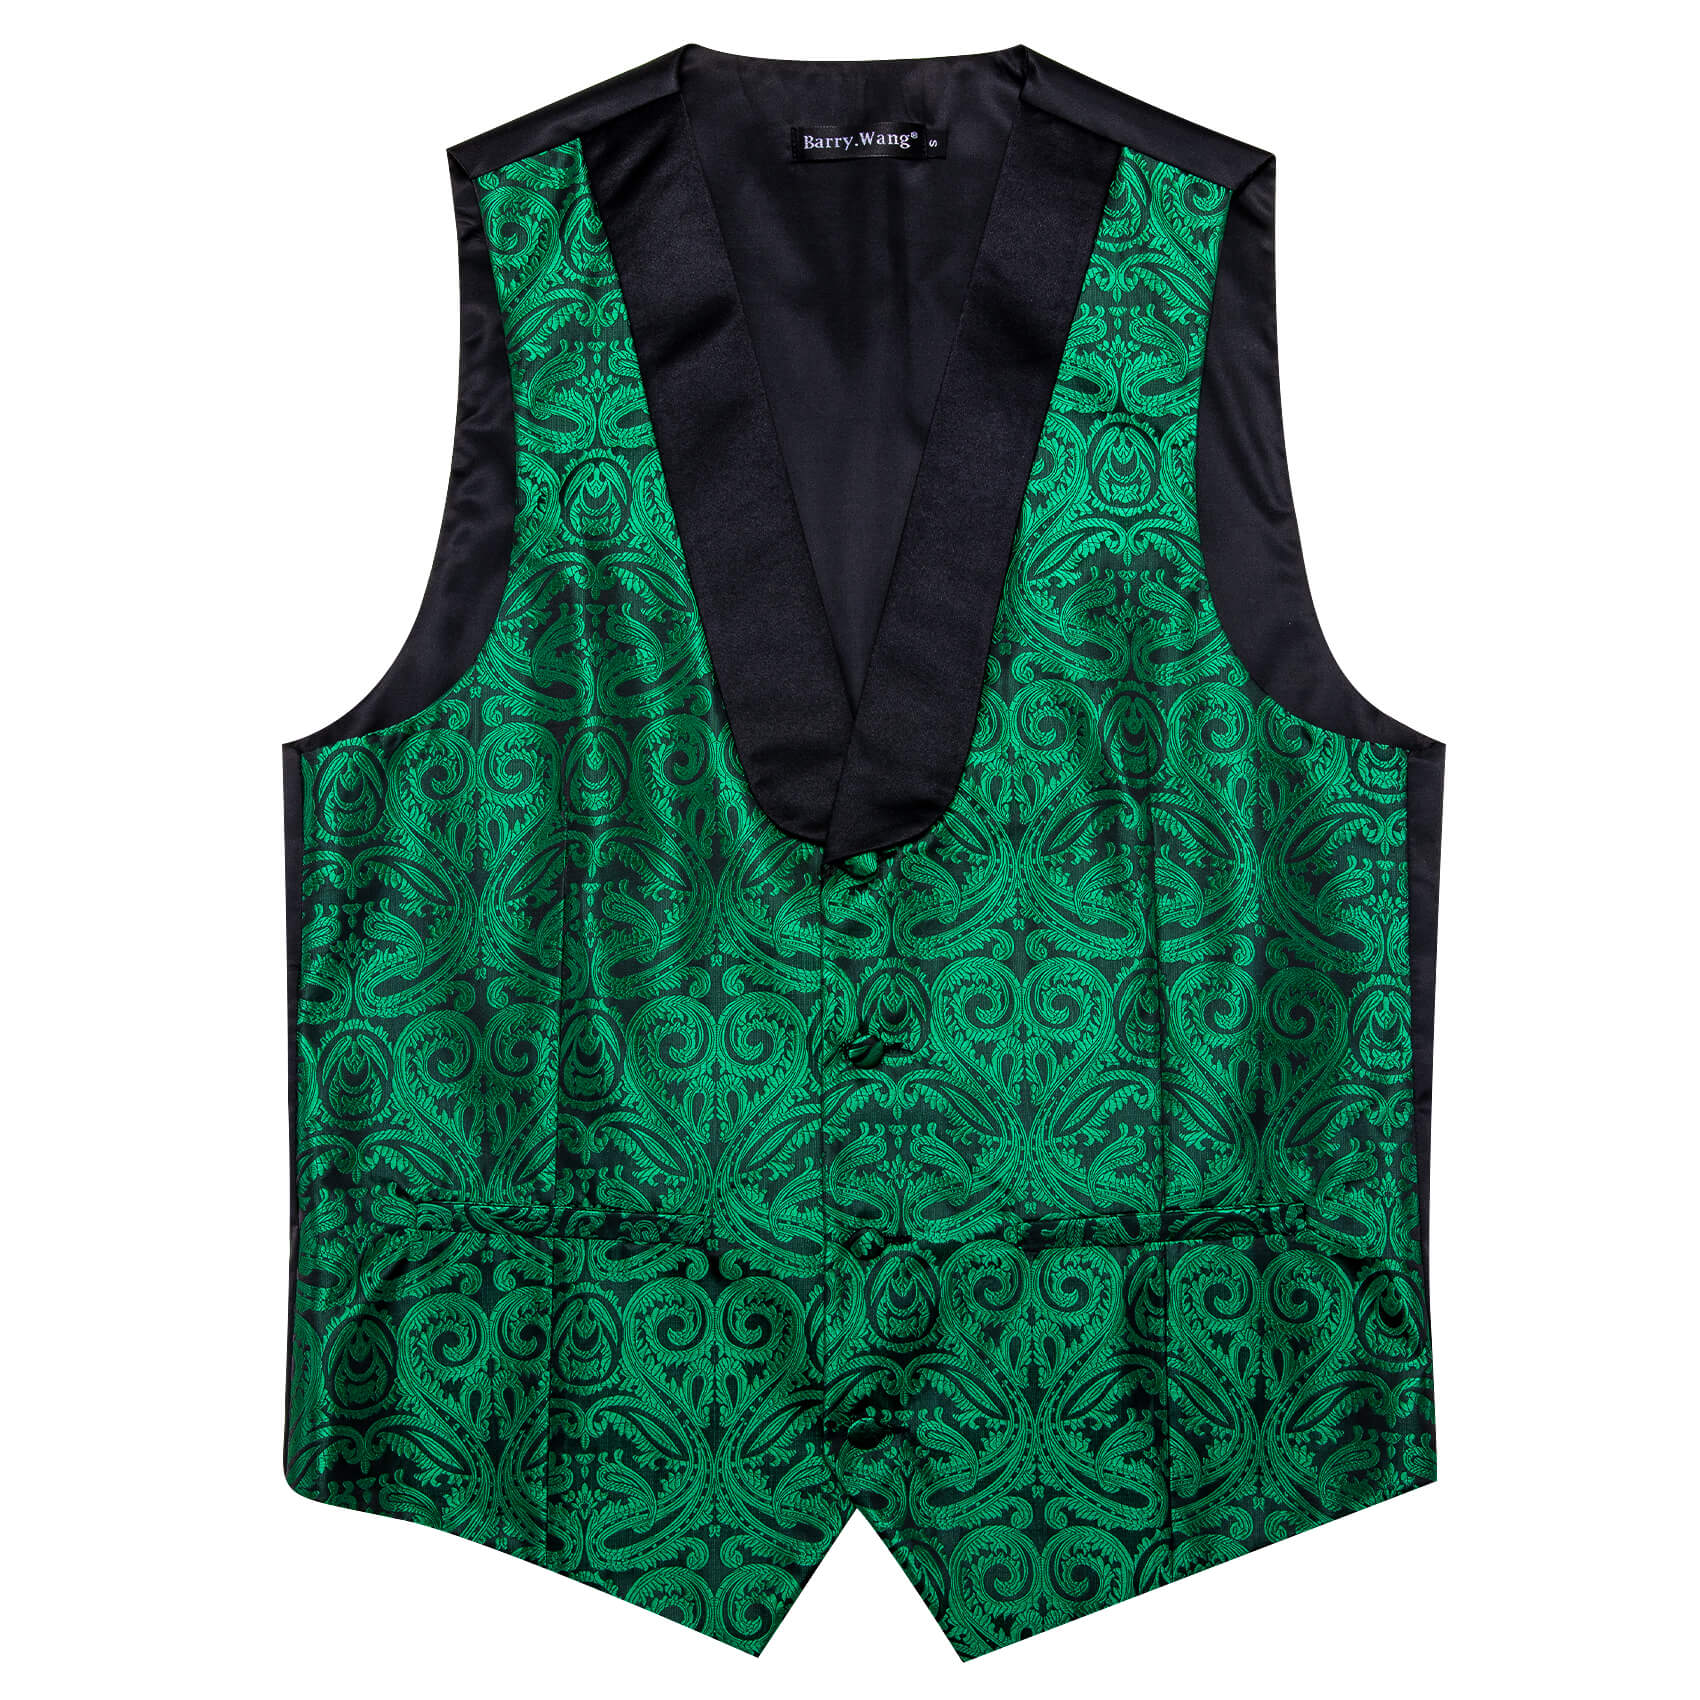 Barry.wang Shawl Collar Vest Forest Green Paisley Vest Tie Set for Men